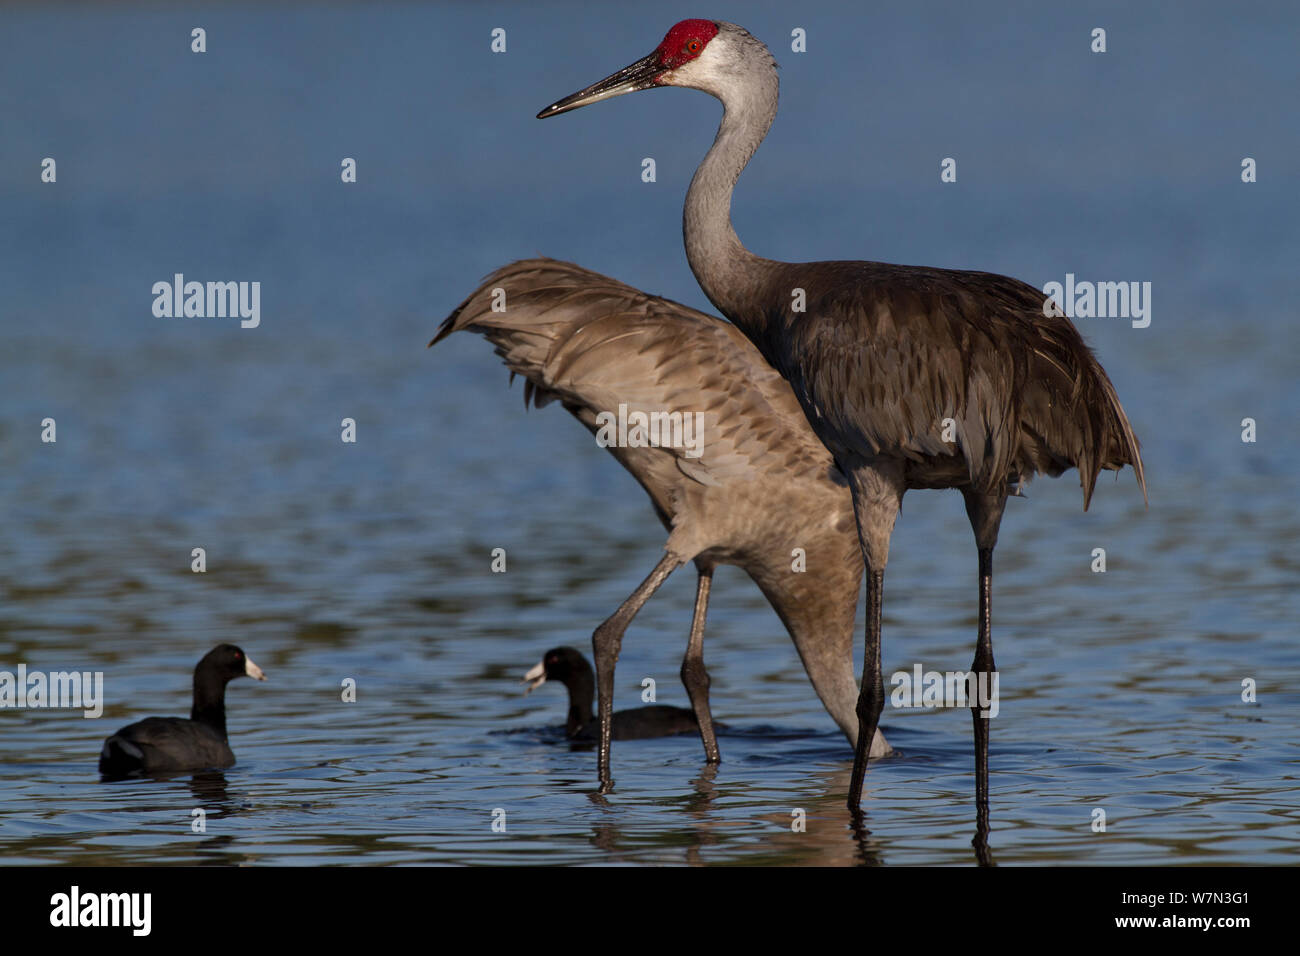 Non-migratory Florida Sandhill Crane (Grus canadensis pratensis) foraging in shallows of Myakka Lake (accompanied by American Coot, Felicia americana); the coots are foraging in the water disturbed by the larger birds. Sarasota, Florida, USA, March. Stock Photo